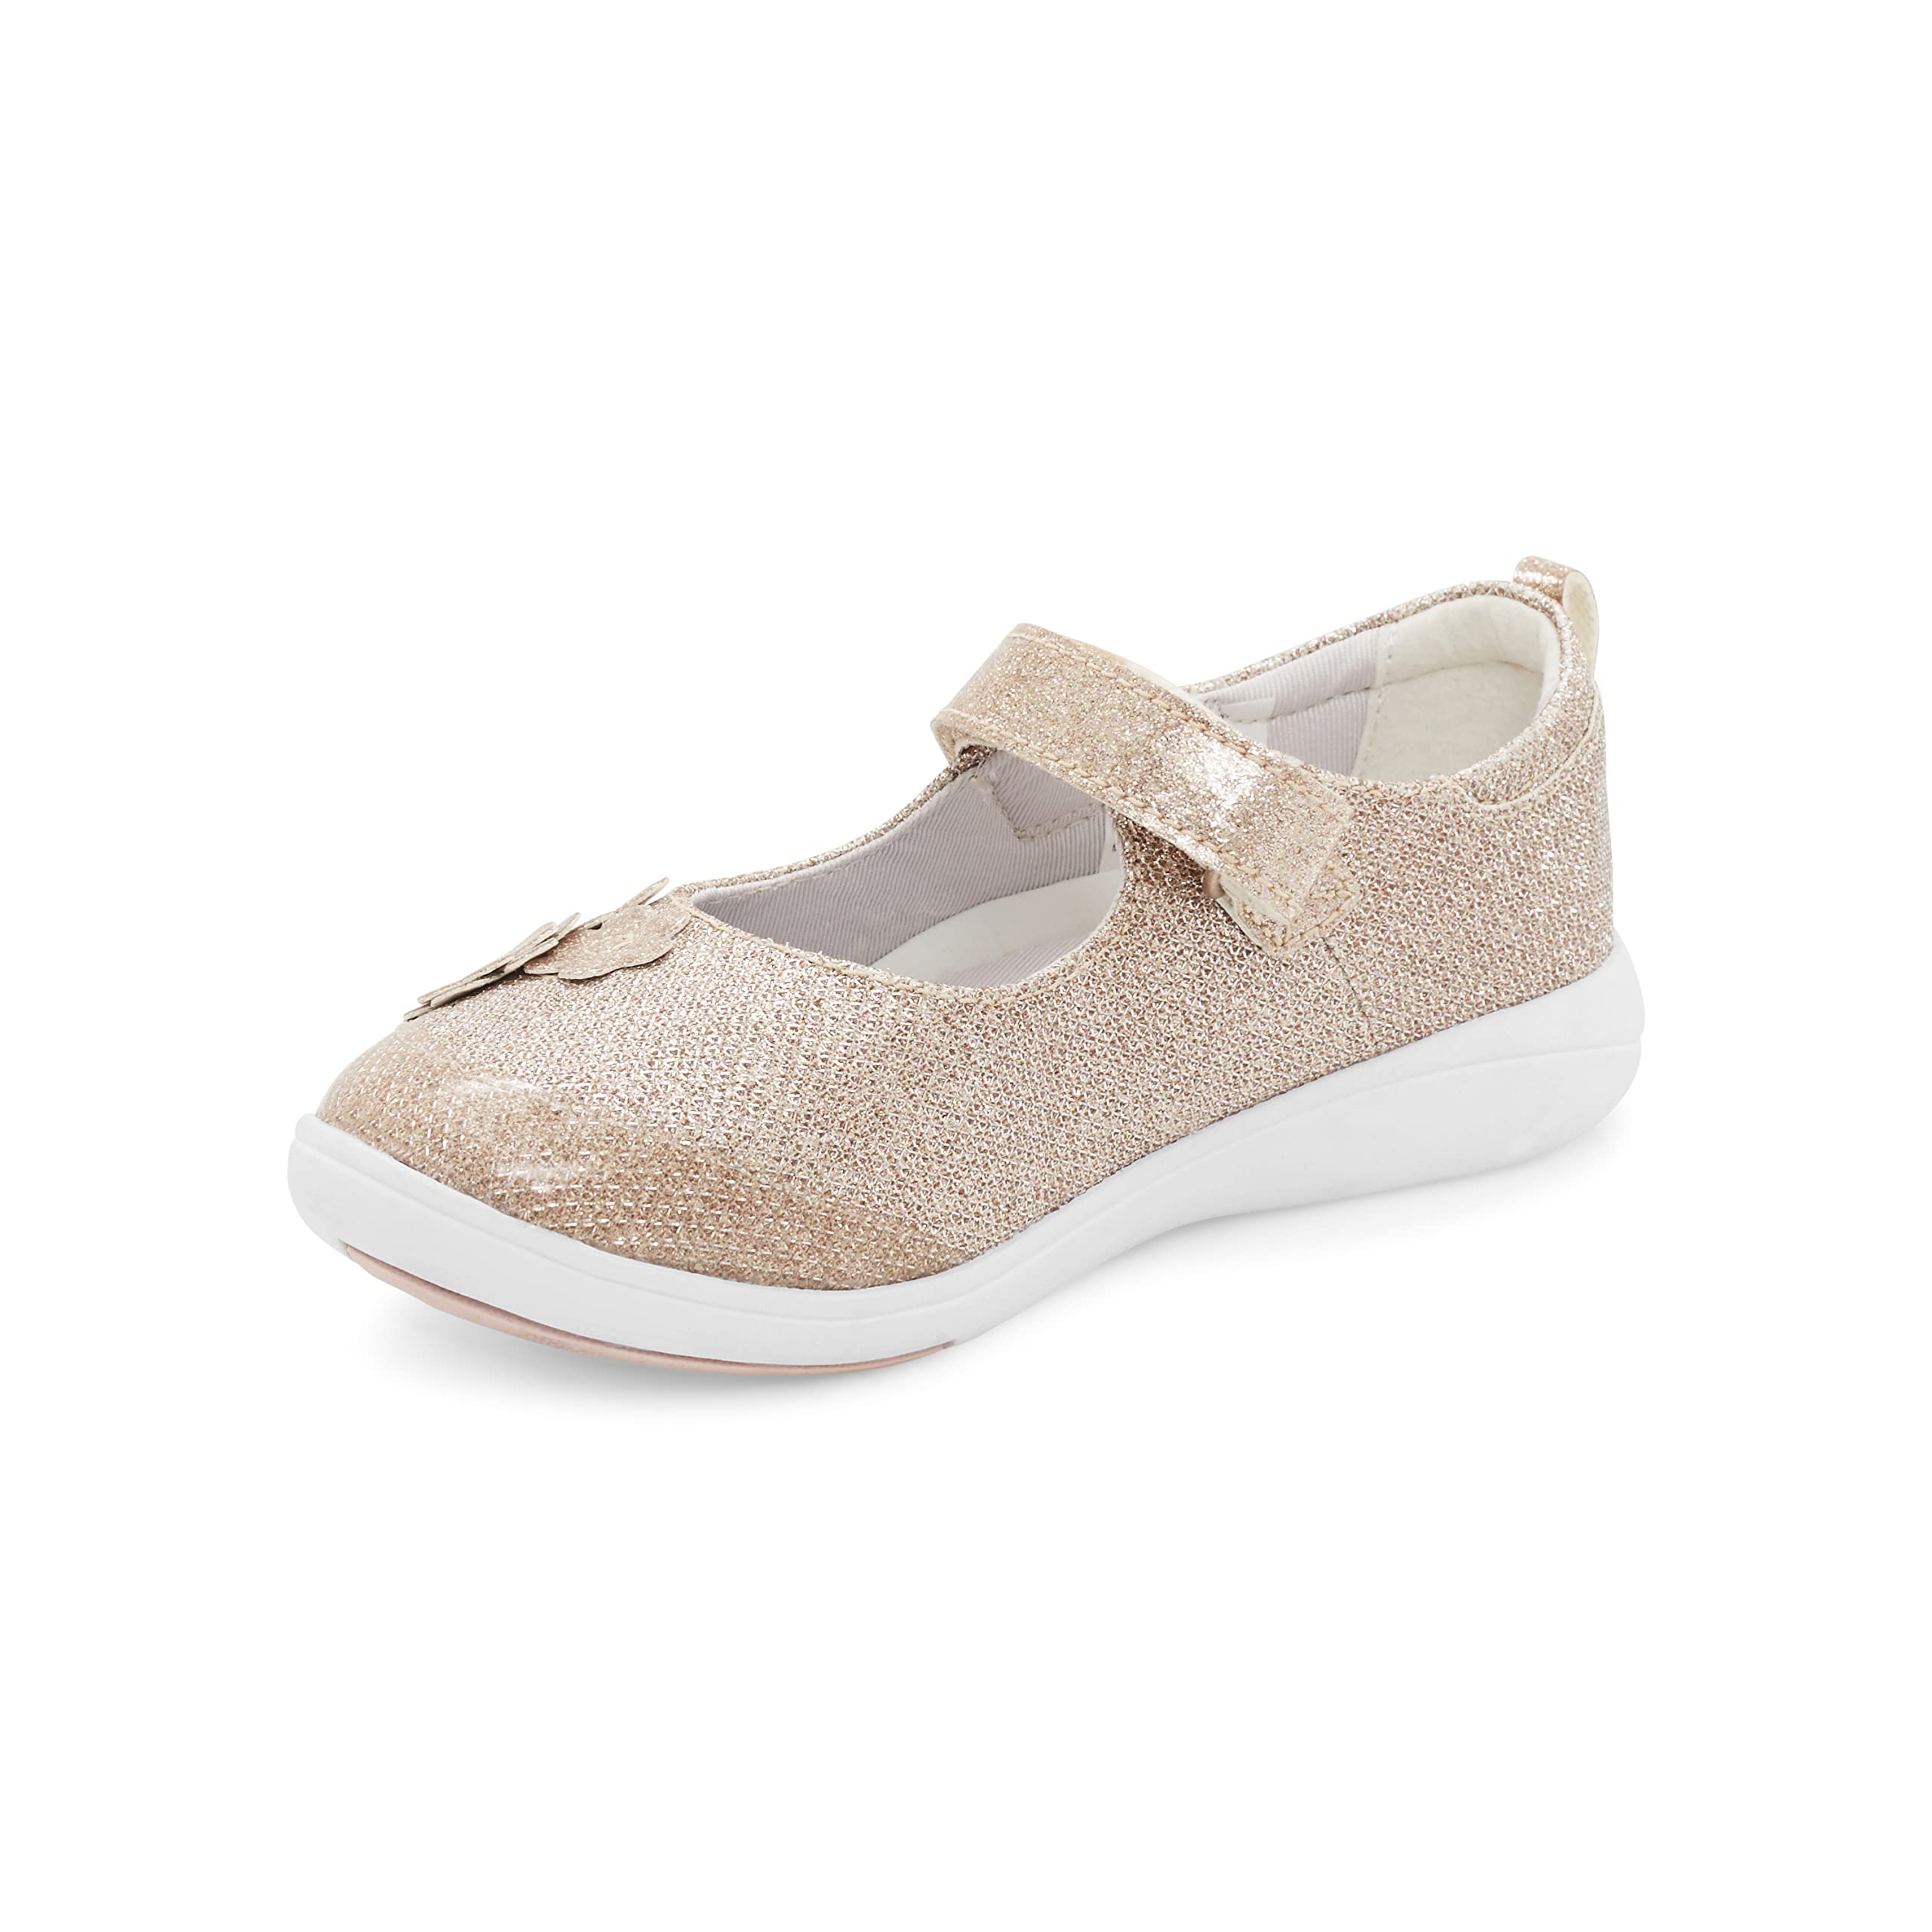 Stride Rite Girl's Holly-Adapt Mary Jane Flat